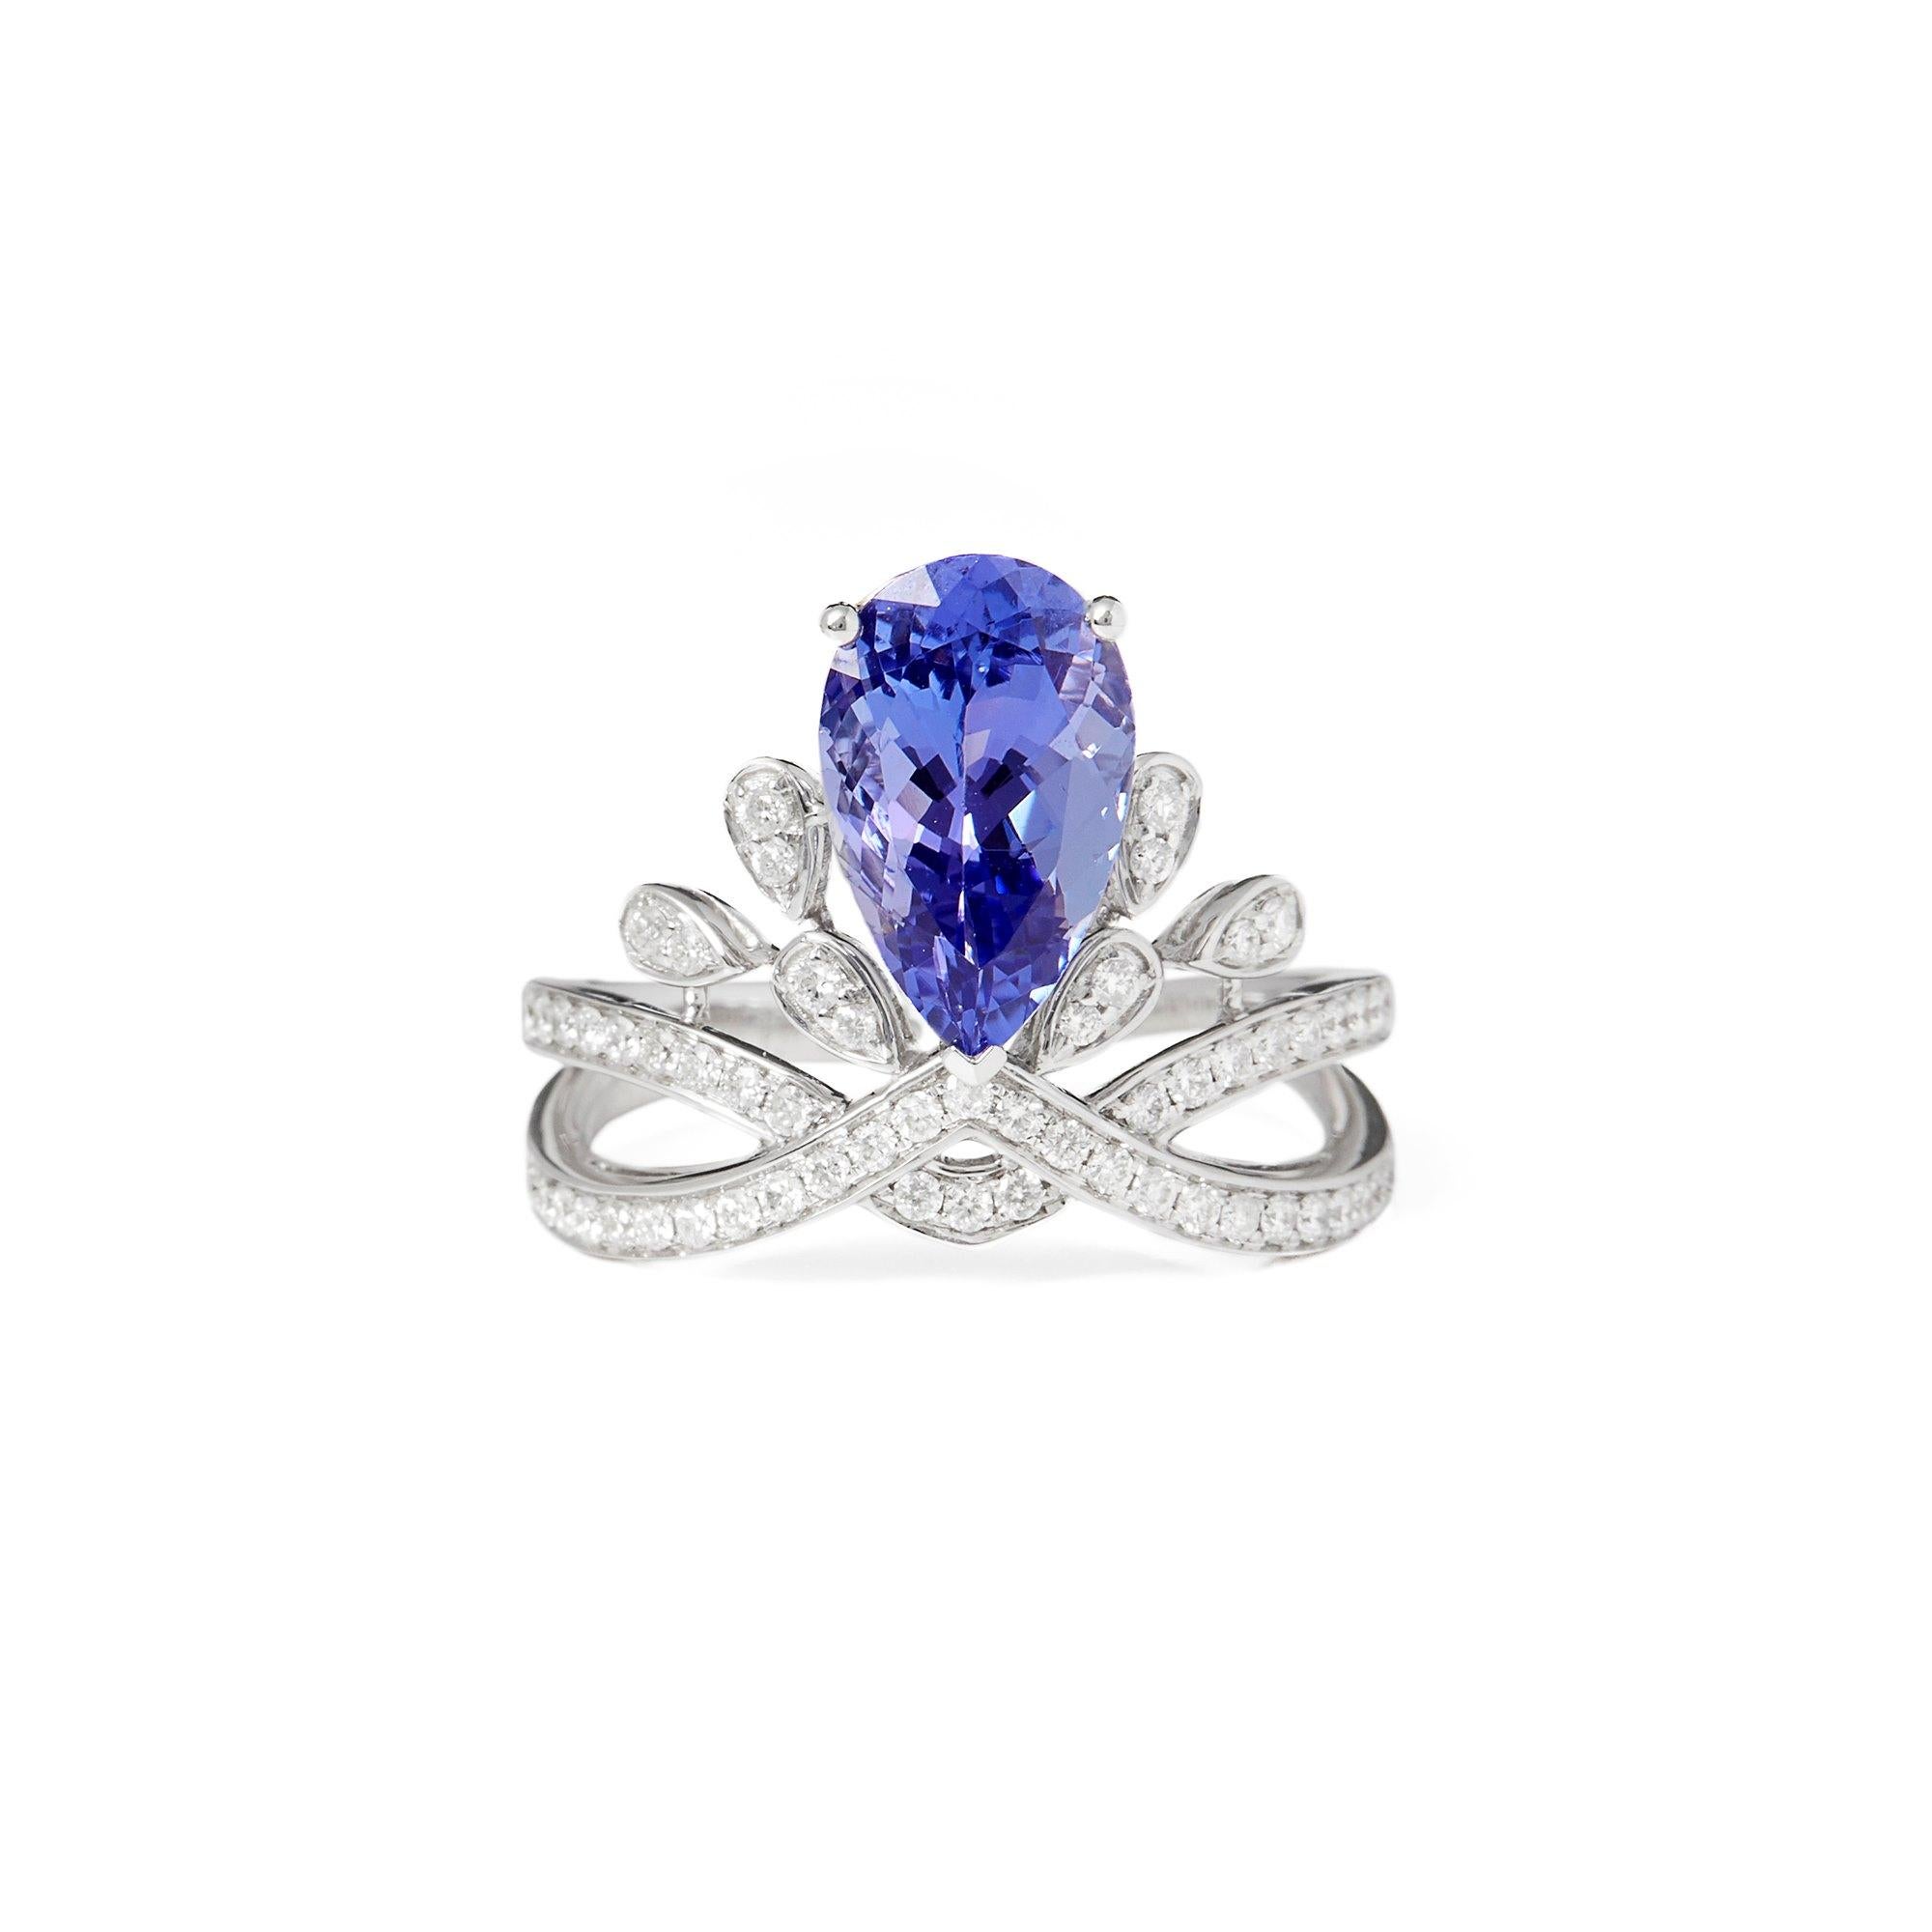 This ring designed by David Jerome is from his private collection and features one pear cut Tanzanite totalling 2.70cts sourced in the D block mine Tanzania. Set with round brilliant cut Diamonds totalling 0.36cts mounted in an 18k white gold